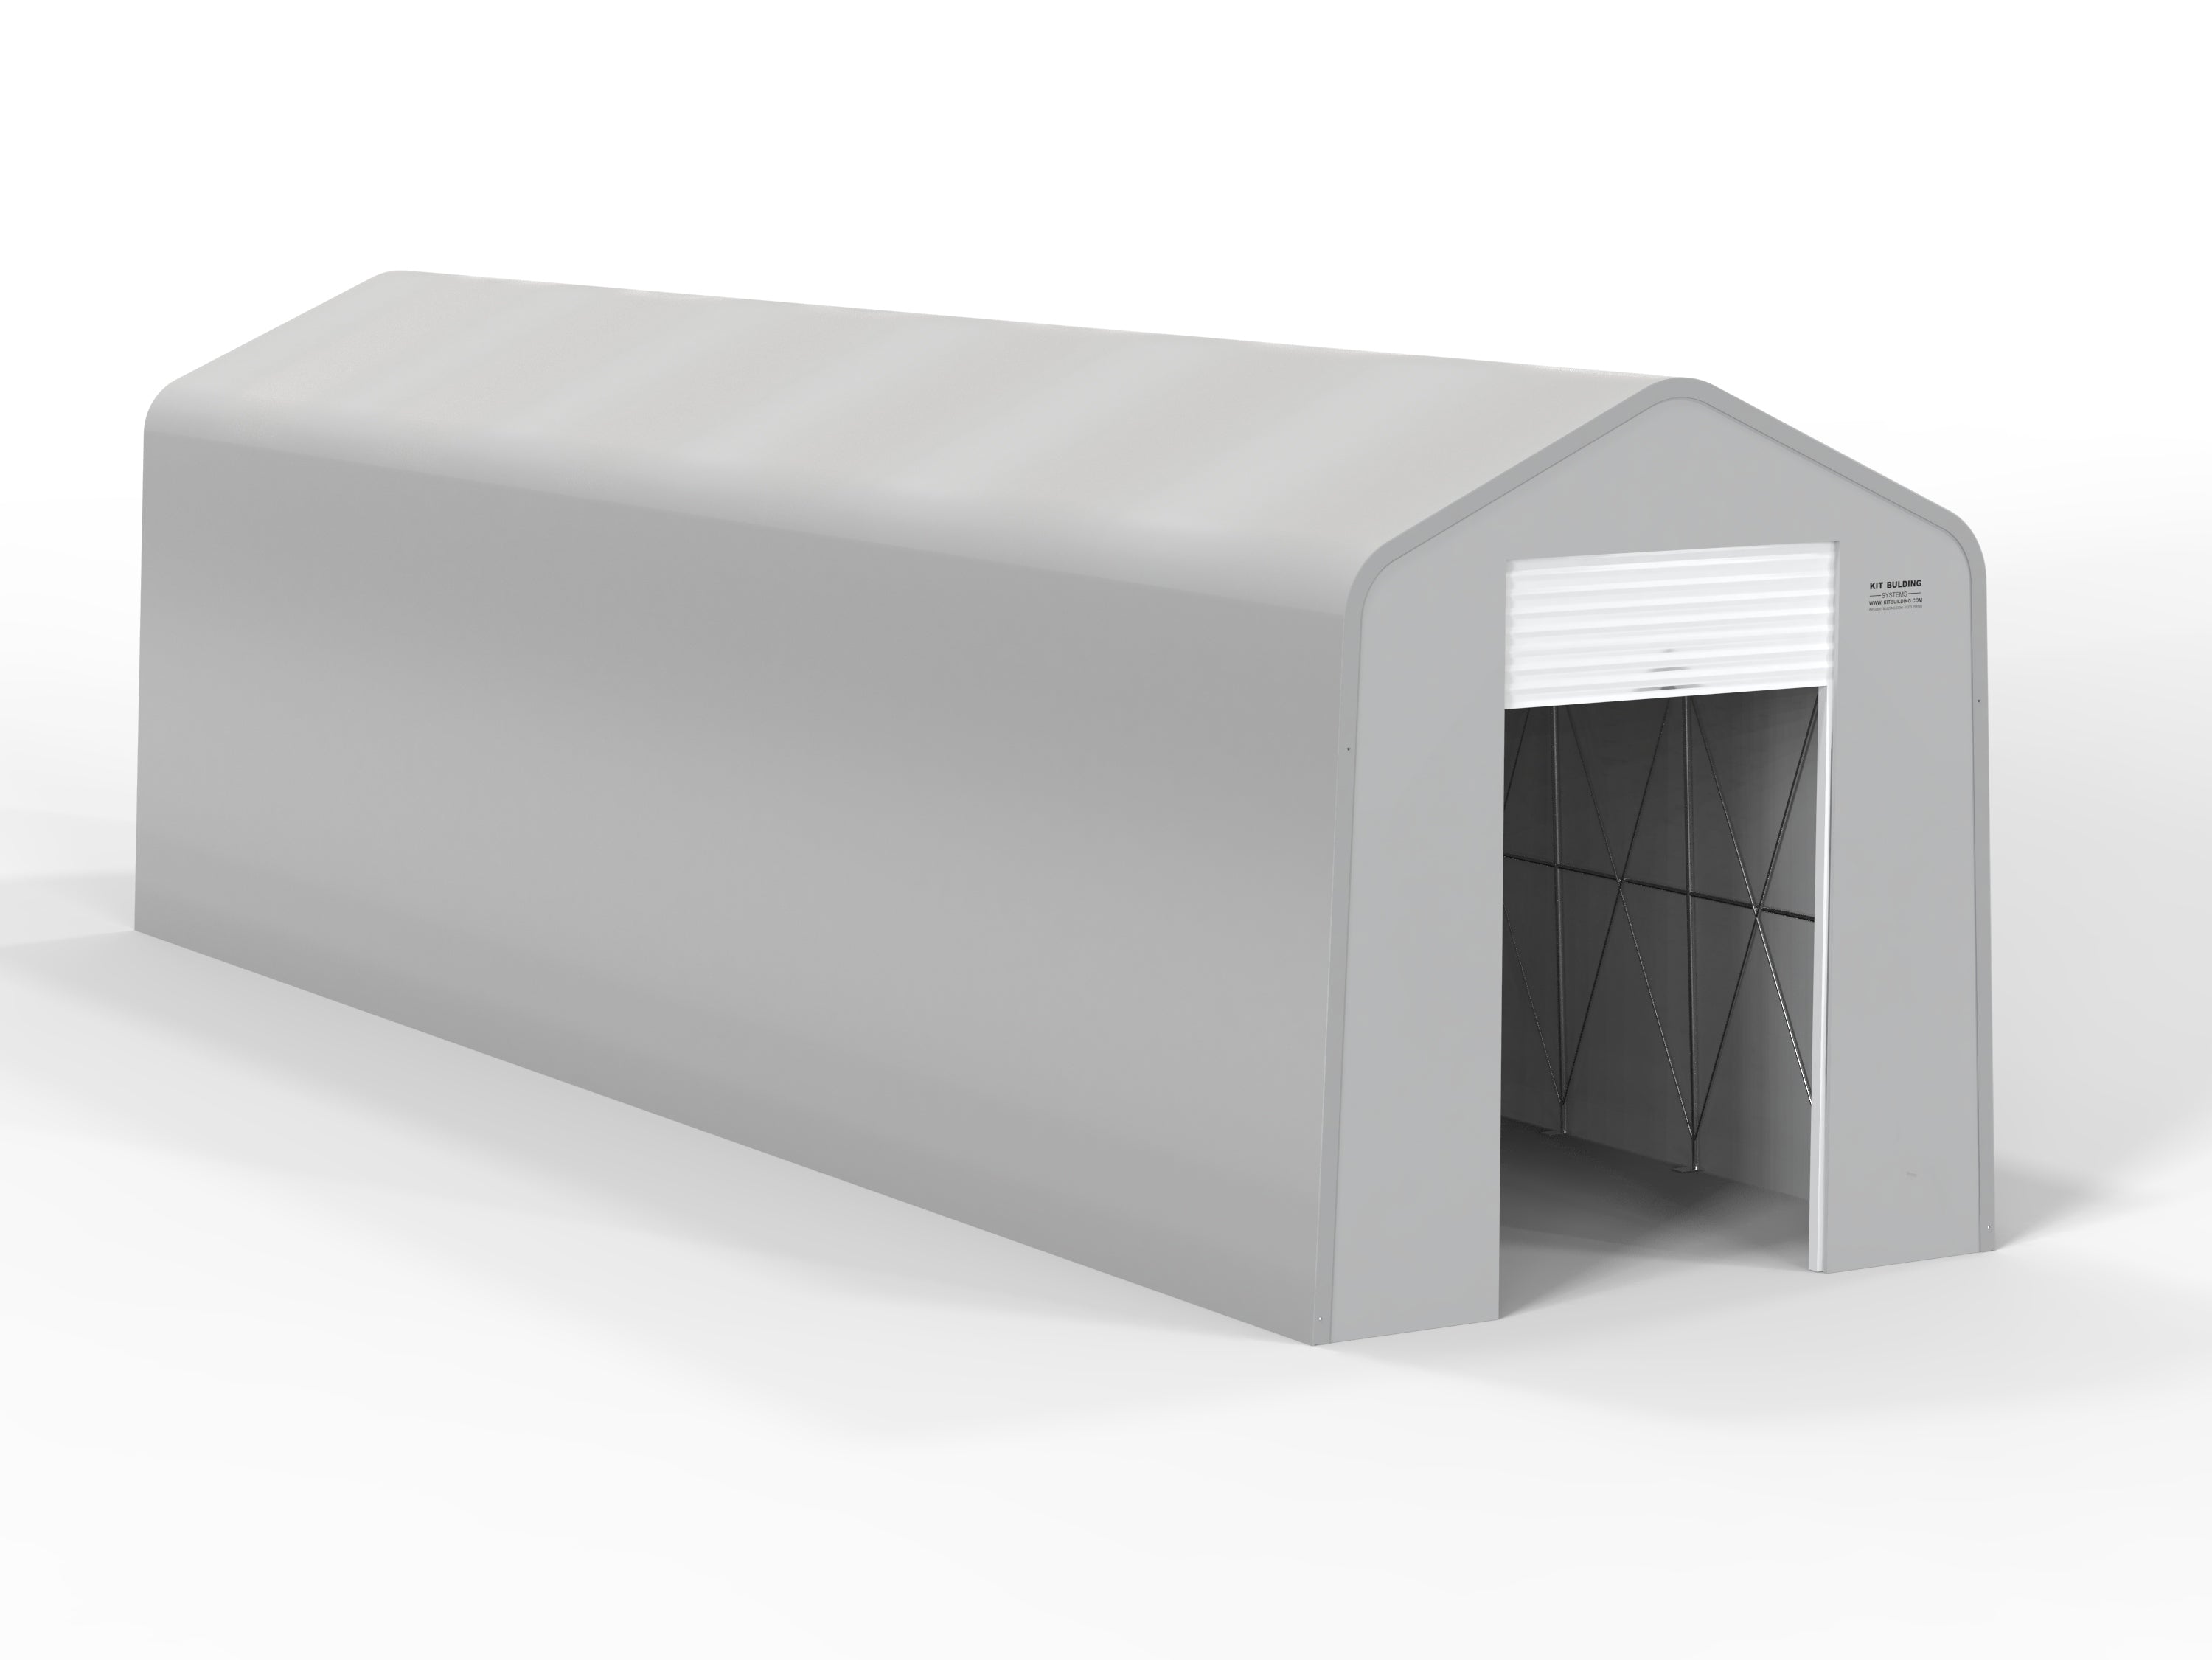 Lorry Shelters